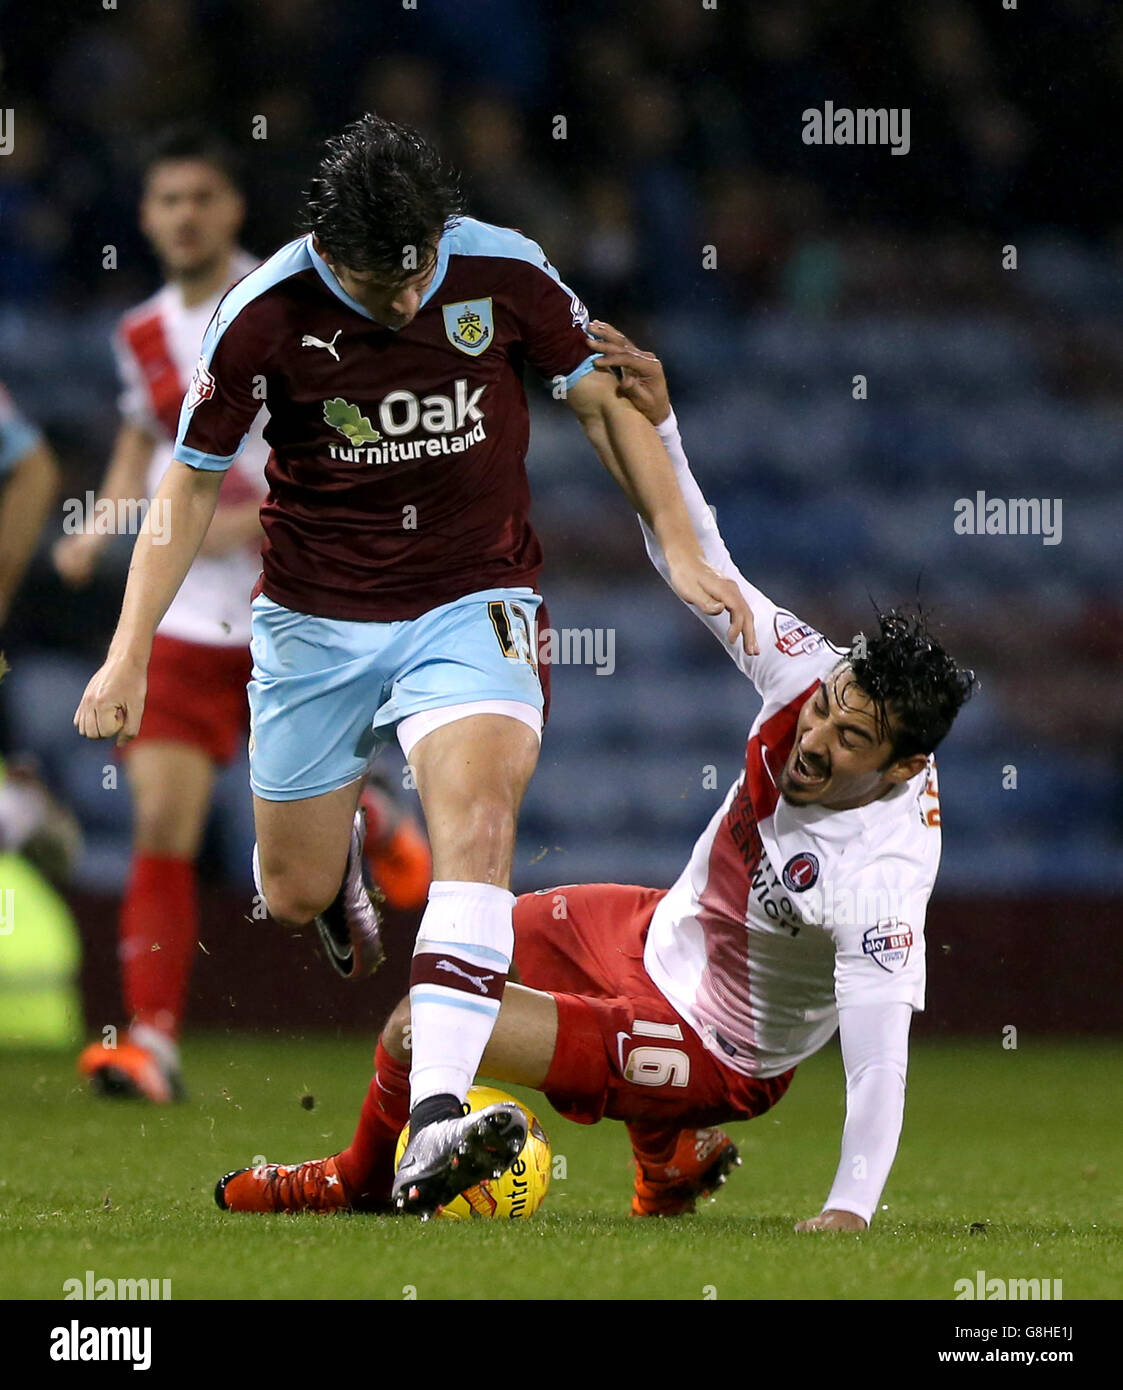 Charlton Athletic's Reza Ghoochannejhad (right) and Burnley's Joey Barton battle for the ball Stock Photo